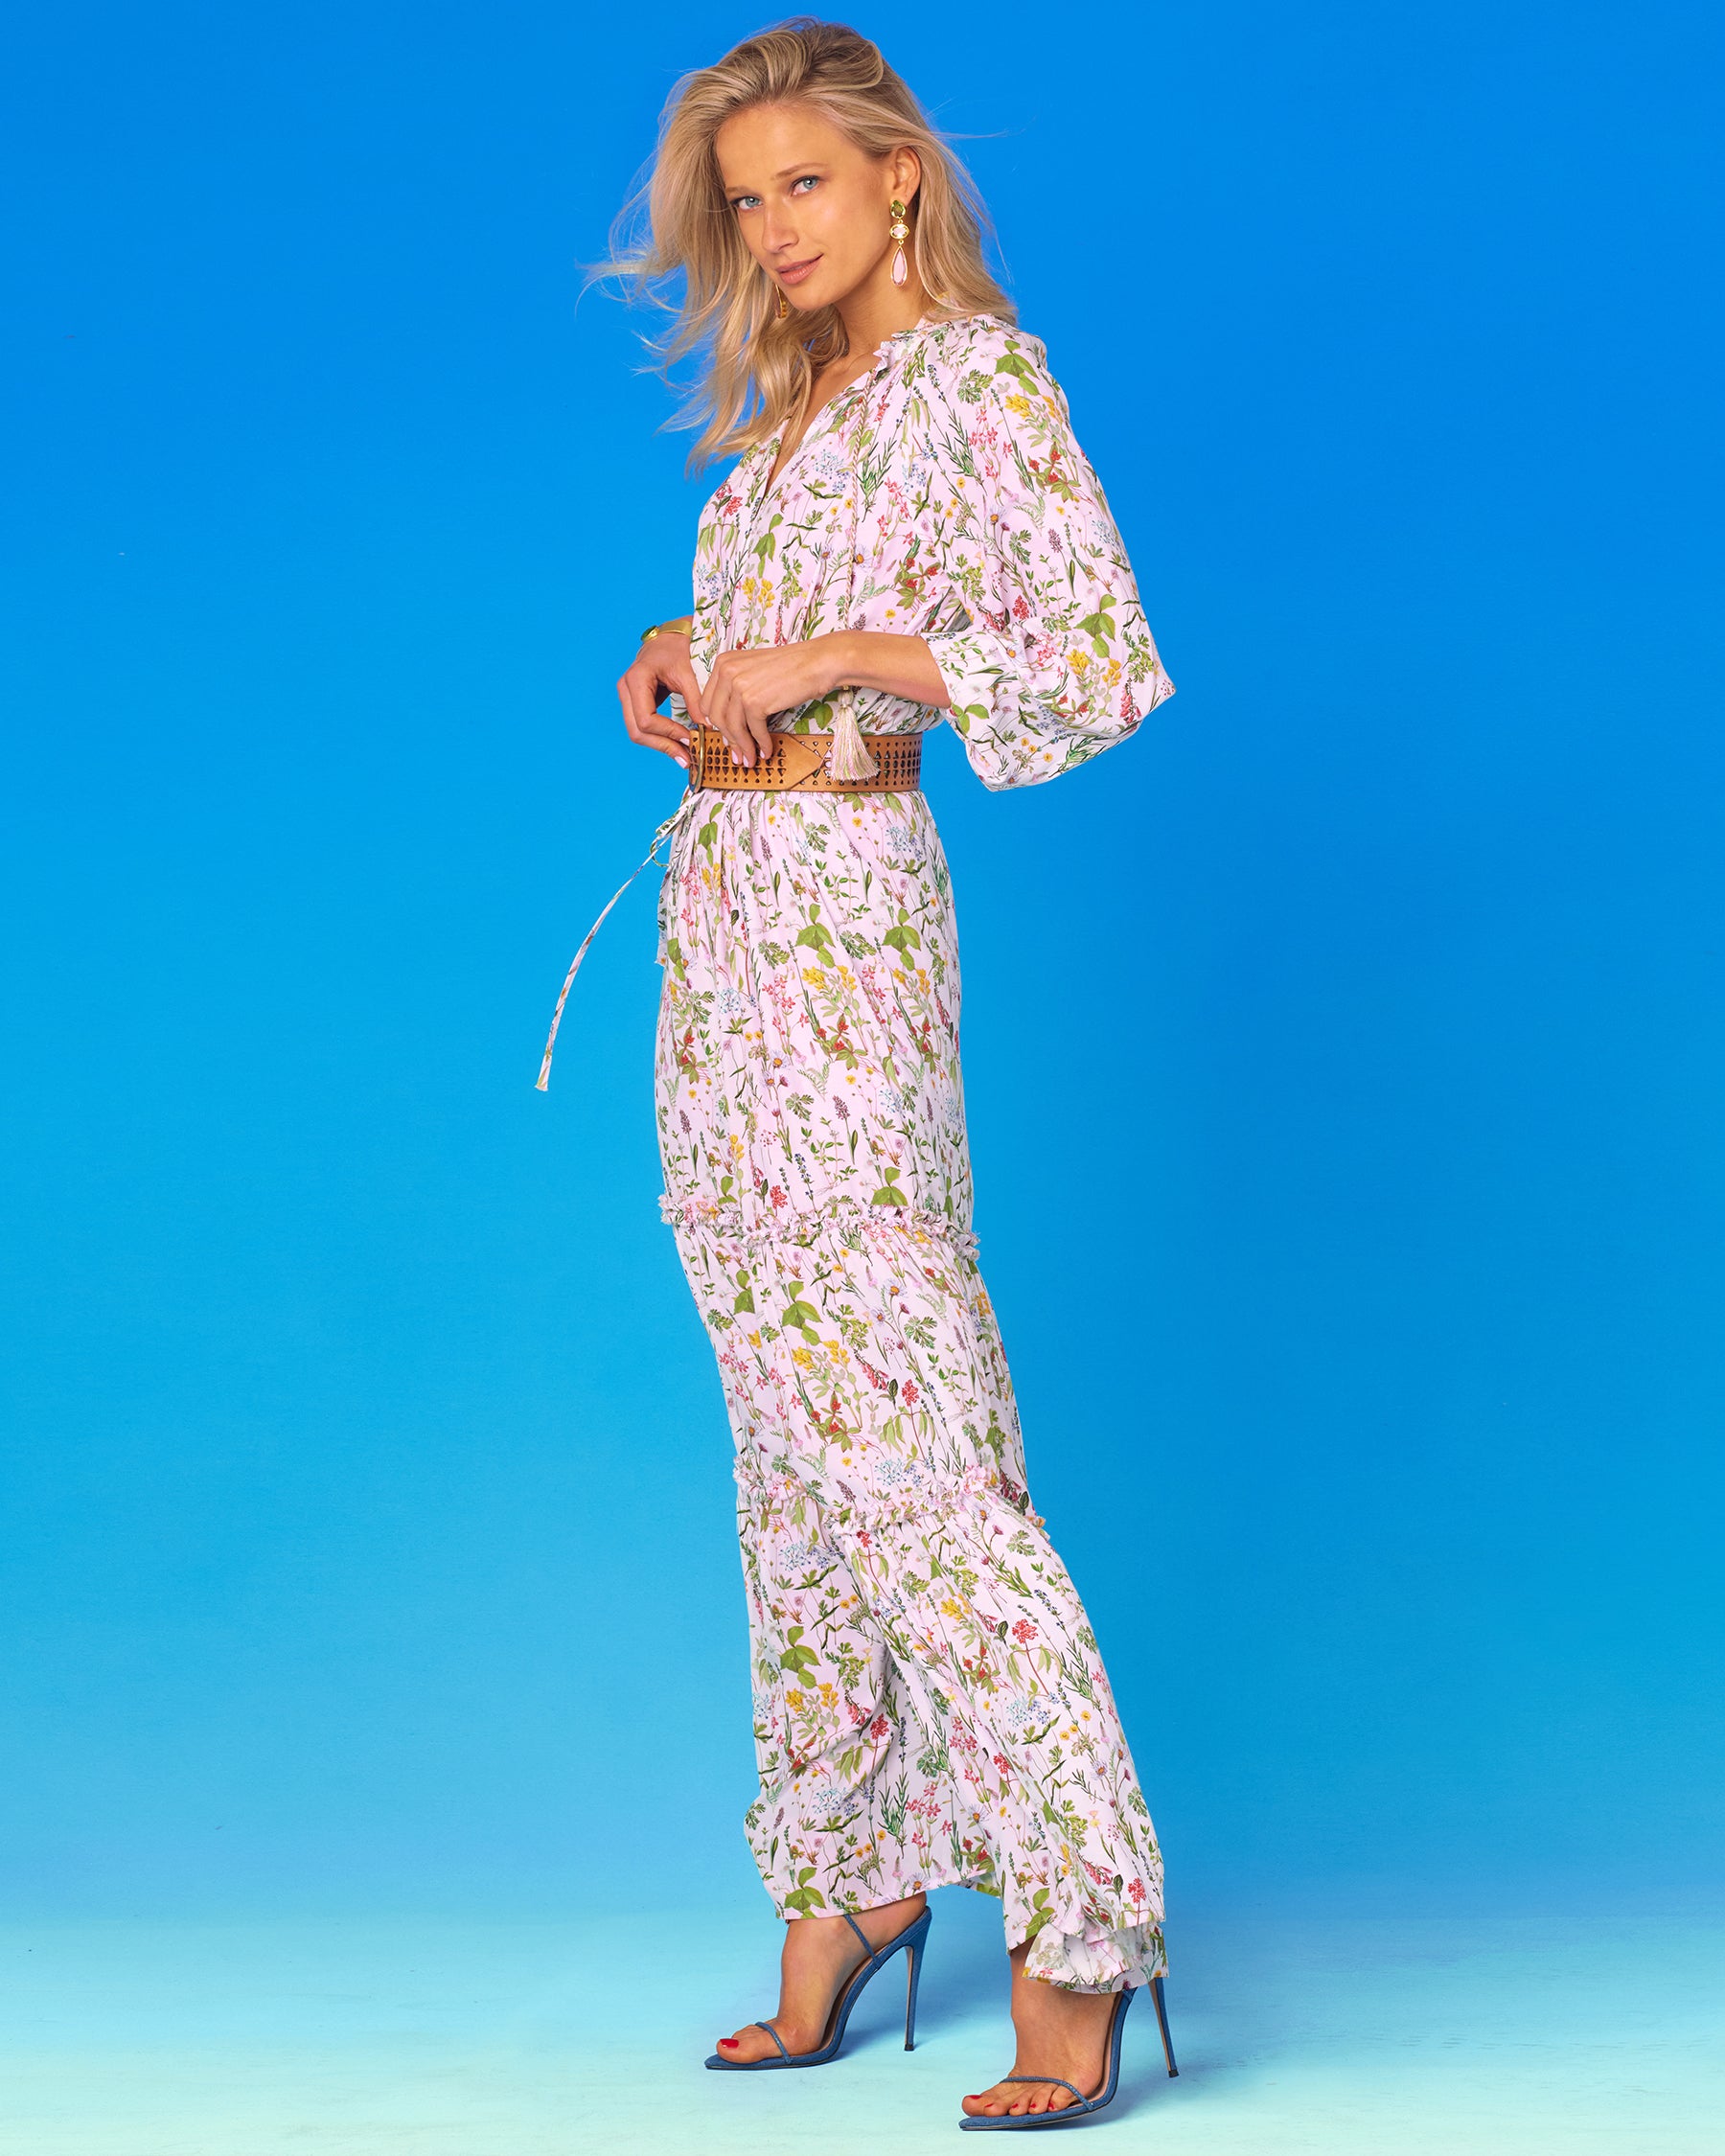 Willow Bohemian Floral Dress-Waist Cinched with Campomaggi Belt